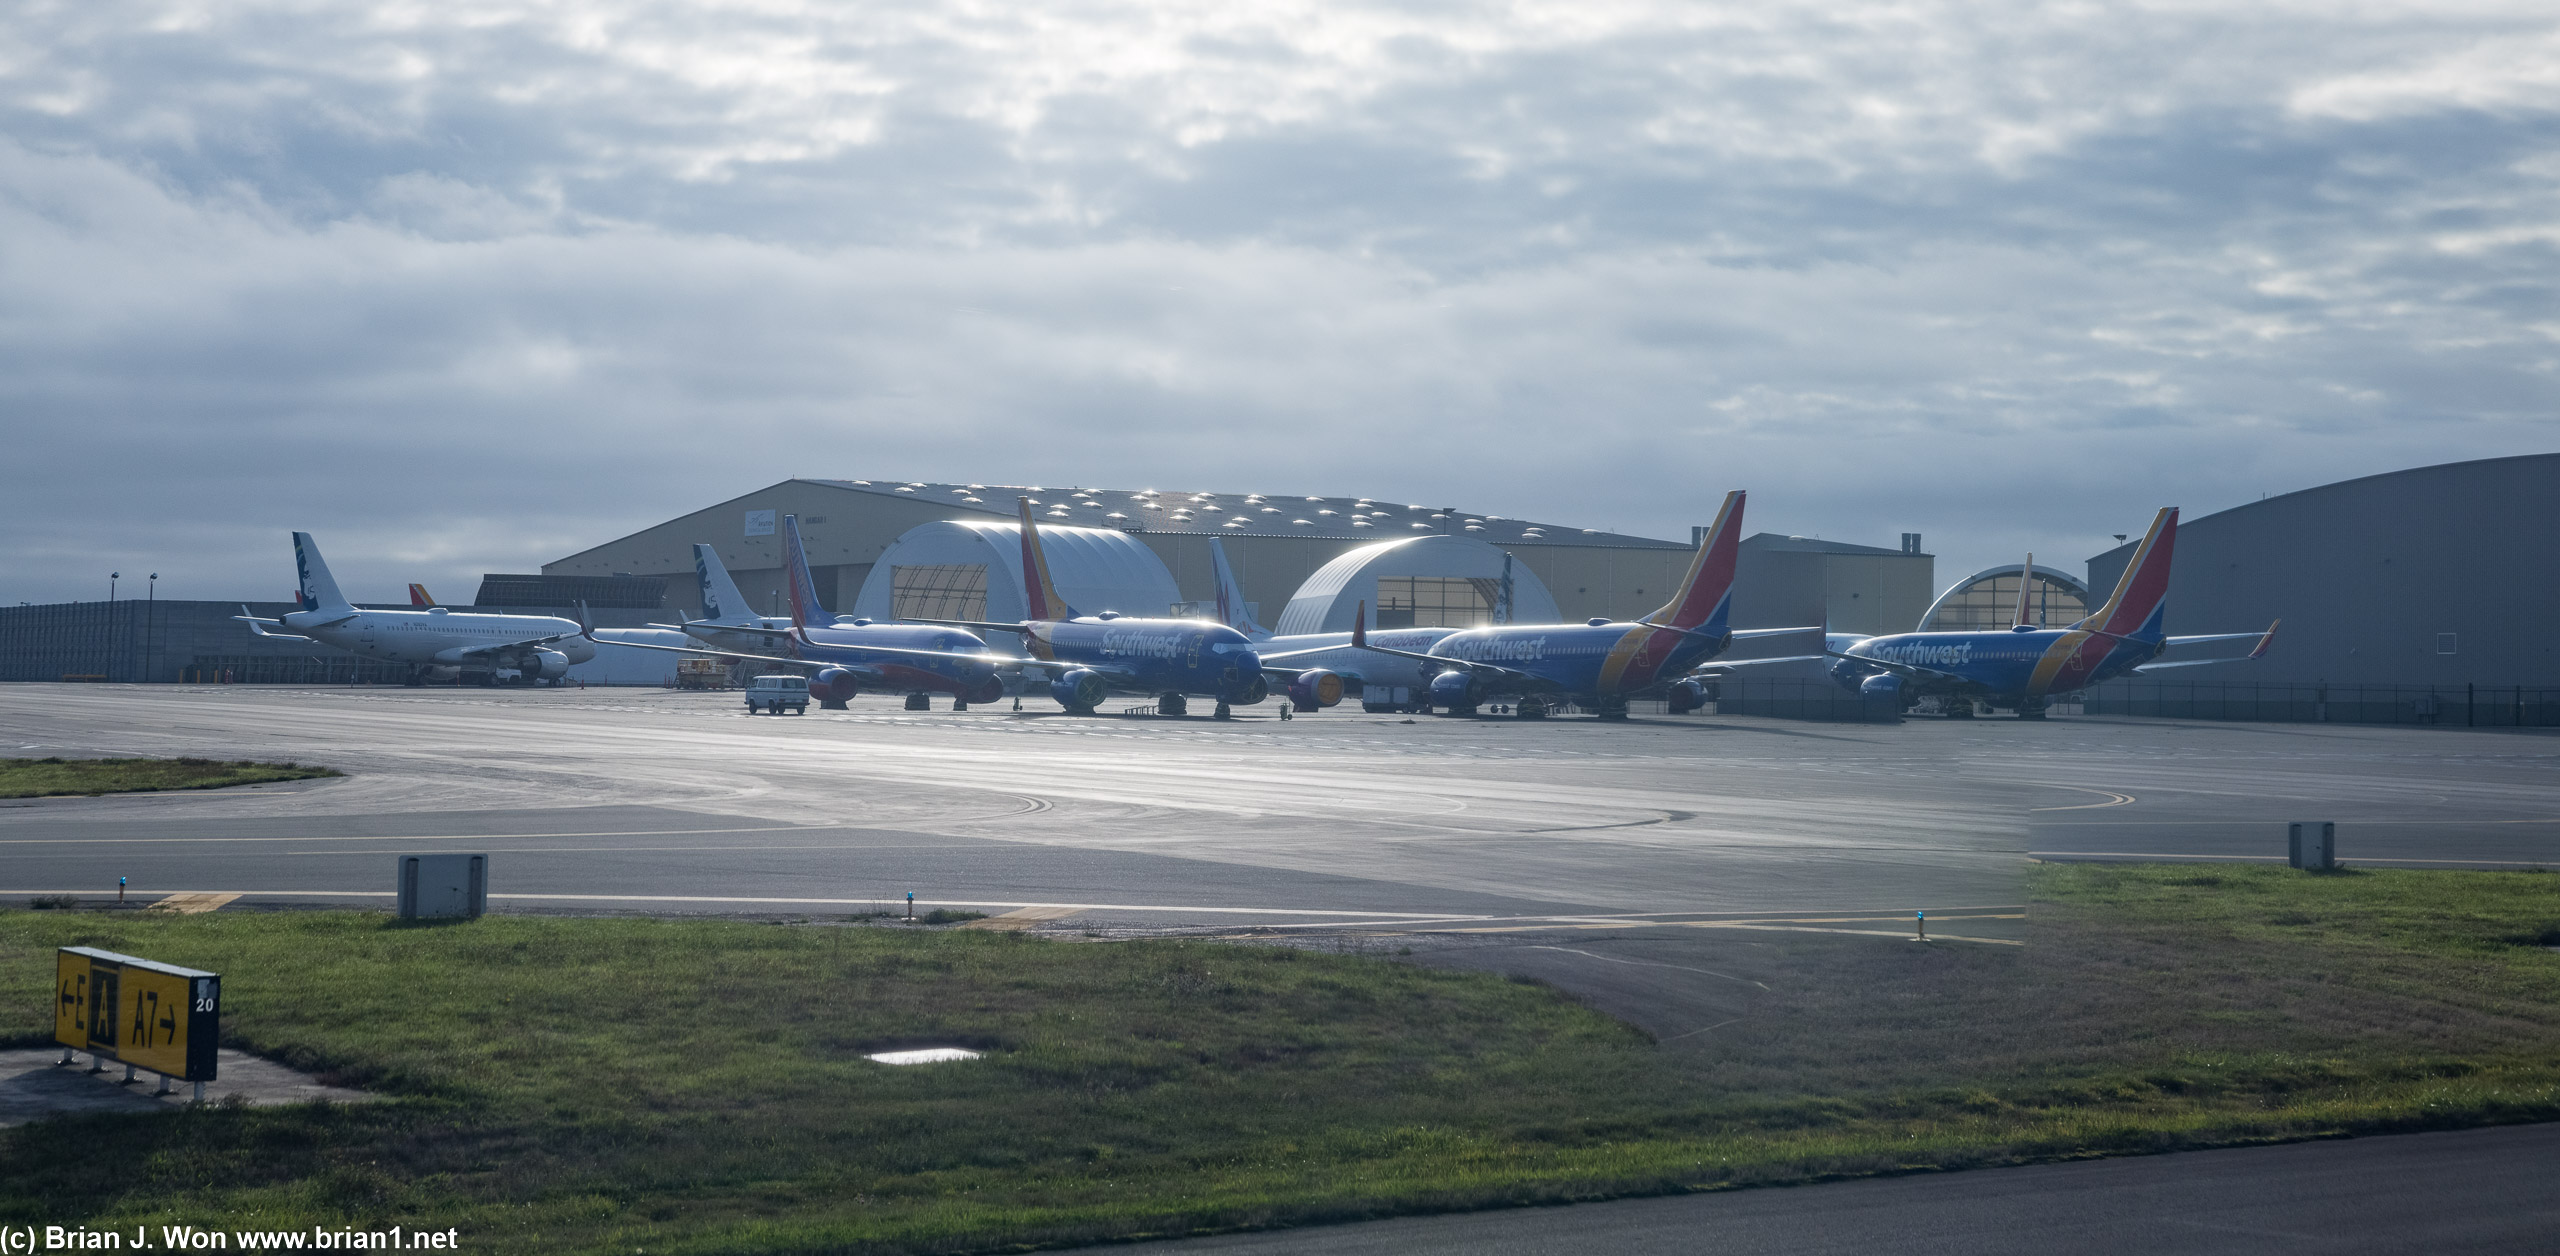 737 MAX's awaiting delivery, with an Alaska Airlines A320 hiding in the back.